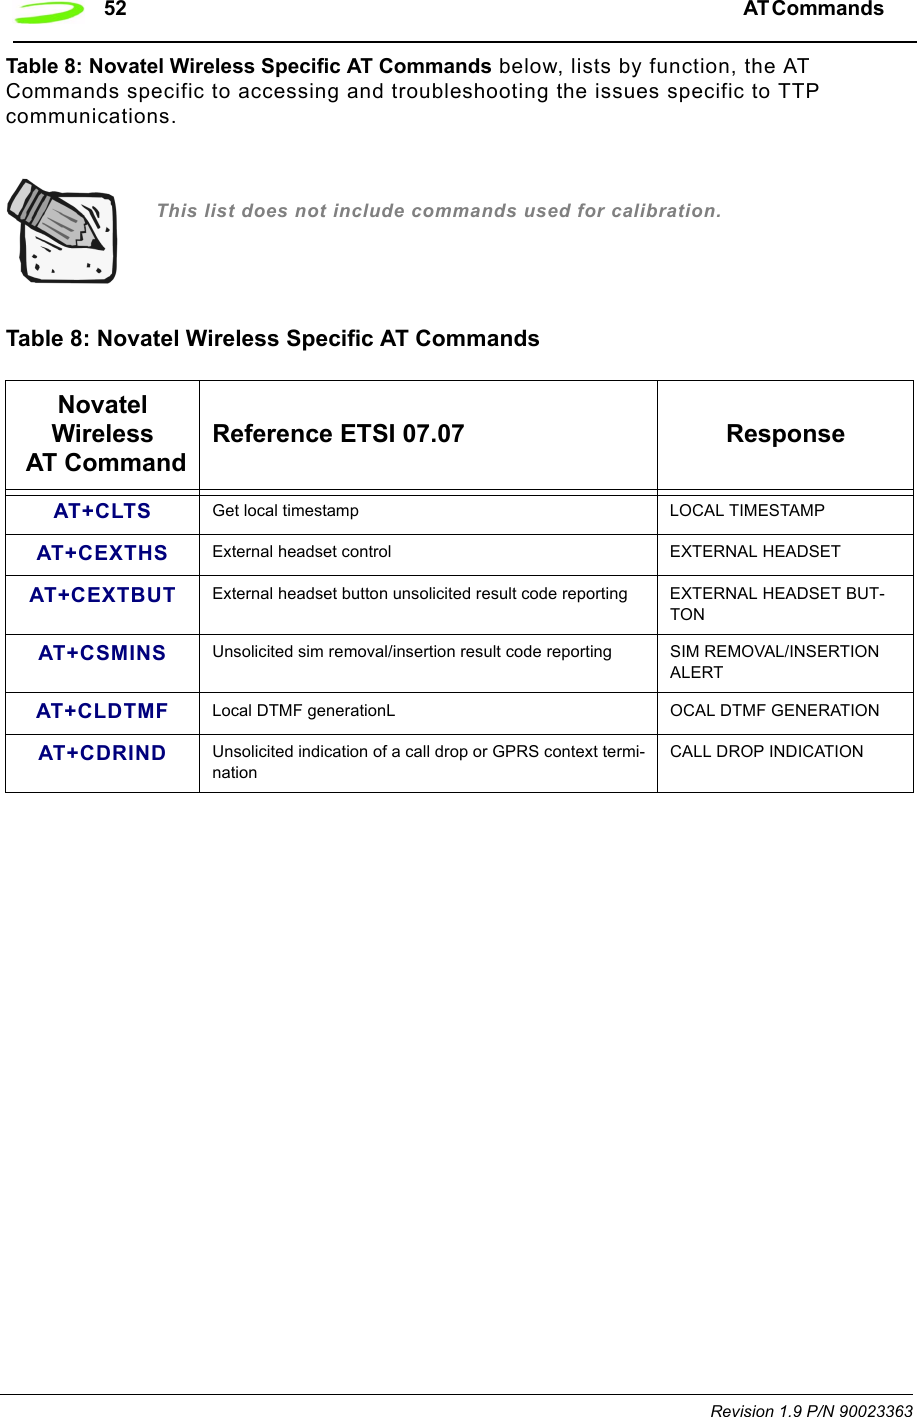 52 AT Commands  Revision 1.9 P/N 90023363Table 8: Novatel Wireless Specific AT Commands below, lists by function, the AT Commands specific to accessing and troubleshooting the issues specific to TTP communications.This list does not include commands used for calibration.Table 8: Novatel Wireless Specific AT CommandsNovatel Wireless AT CommandReference ETSI 07.07 ResponseAT+CLTS Get local timestamp LOCAL TIMESTAMPAT+CEXTHS External headset control EXTERNAL HEADSETAT+CEXTBUT External headset button unsolicited result code reporting EXTERNAL HEADSET BUT-TONAT+CSMINS Unsolicited sim removal/insertion result code reporting SIM REMOVAL/INSERTION ALERTAT+CLDTMF Local DTMF generationL OCAL DTMF GENERATIONAT+CDRIND Unsolicited indication of a call drop or GPRS context termi-nation CALL DROP INDICATION